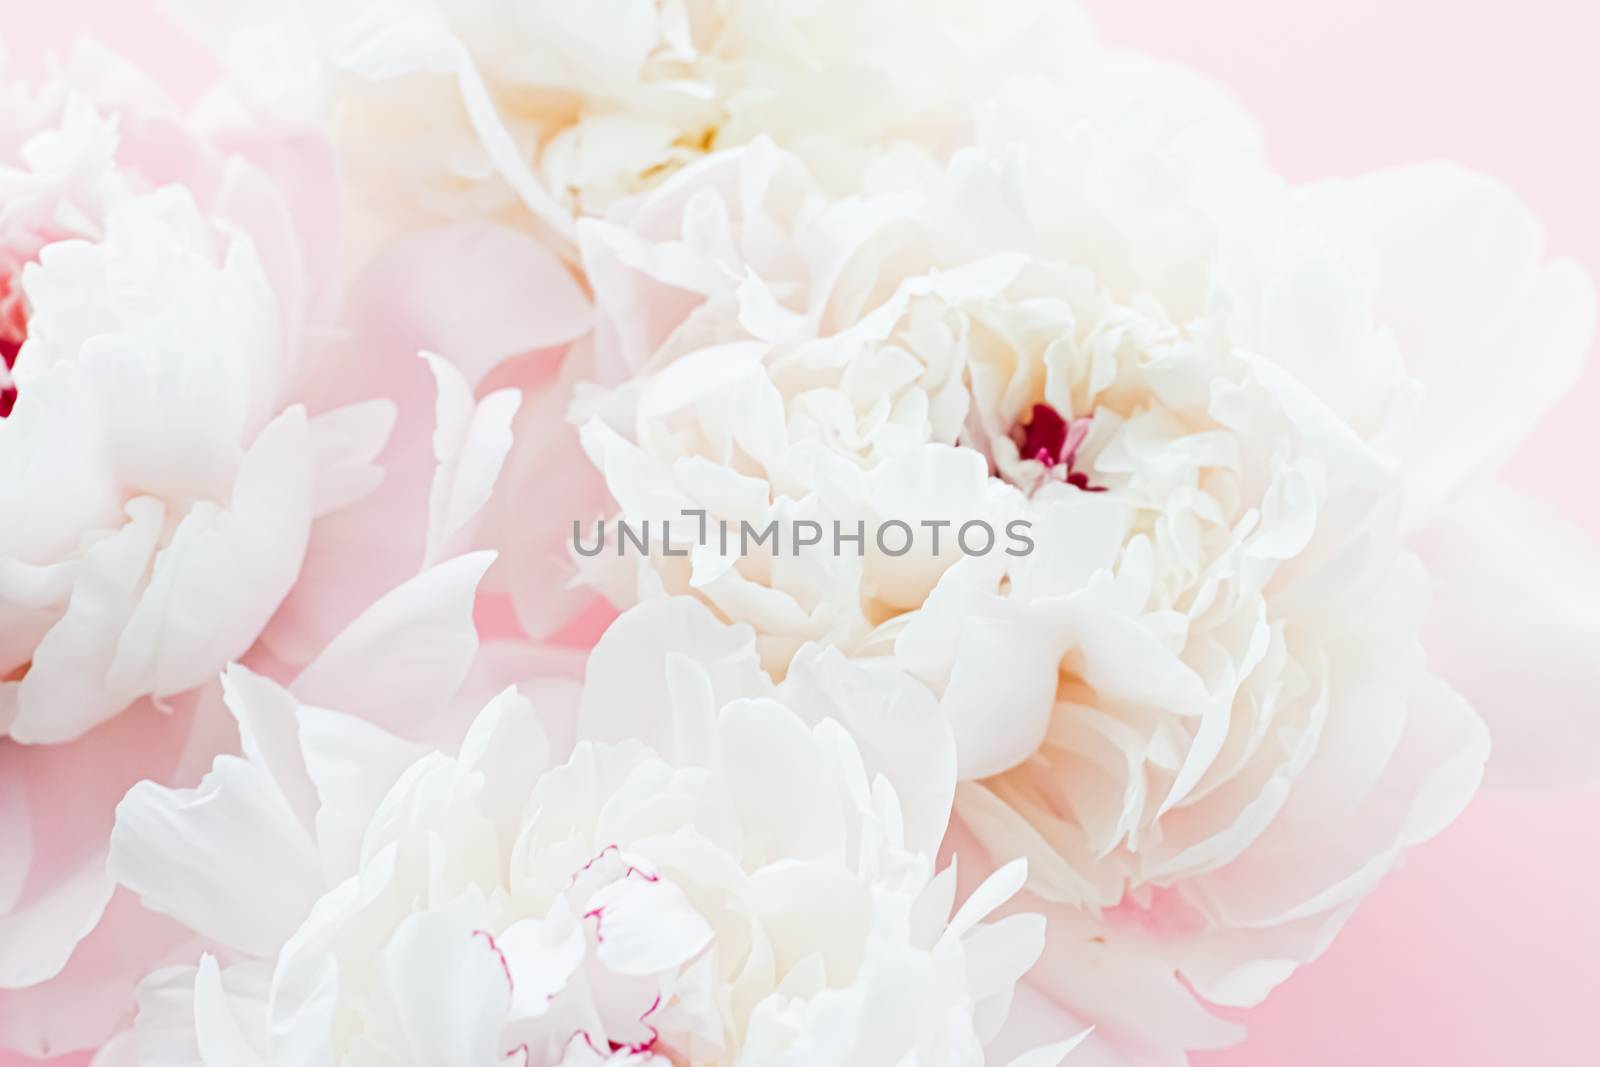 White peony flowers as floral art on pink background, wedding flatlay and luxury branding design